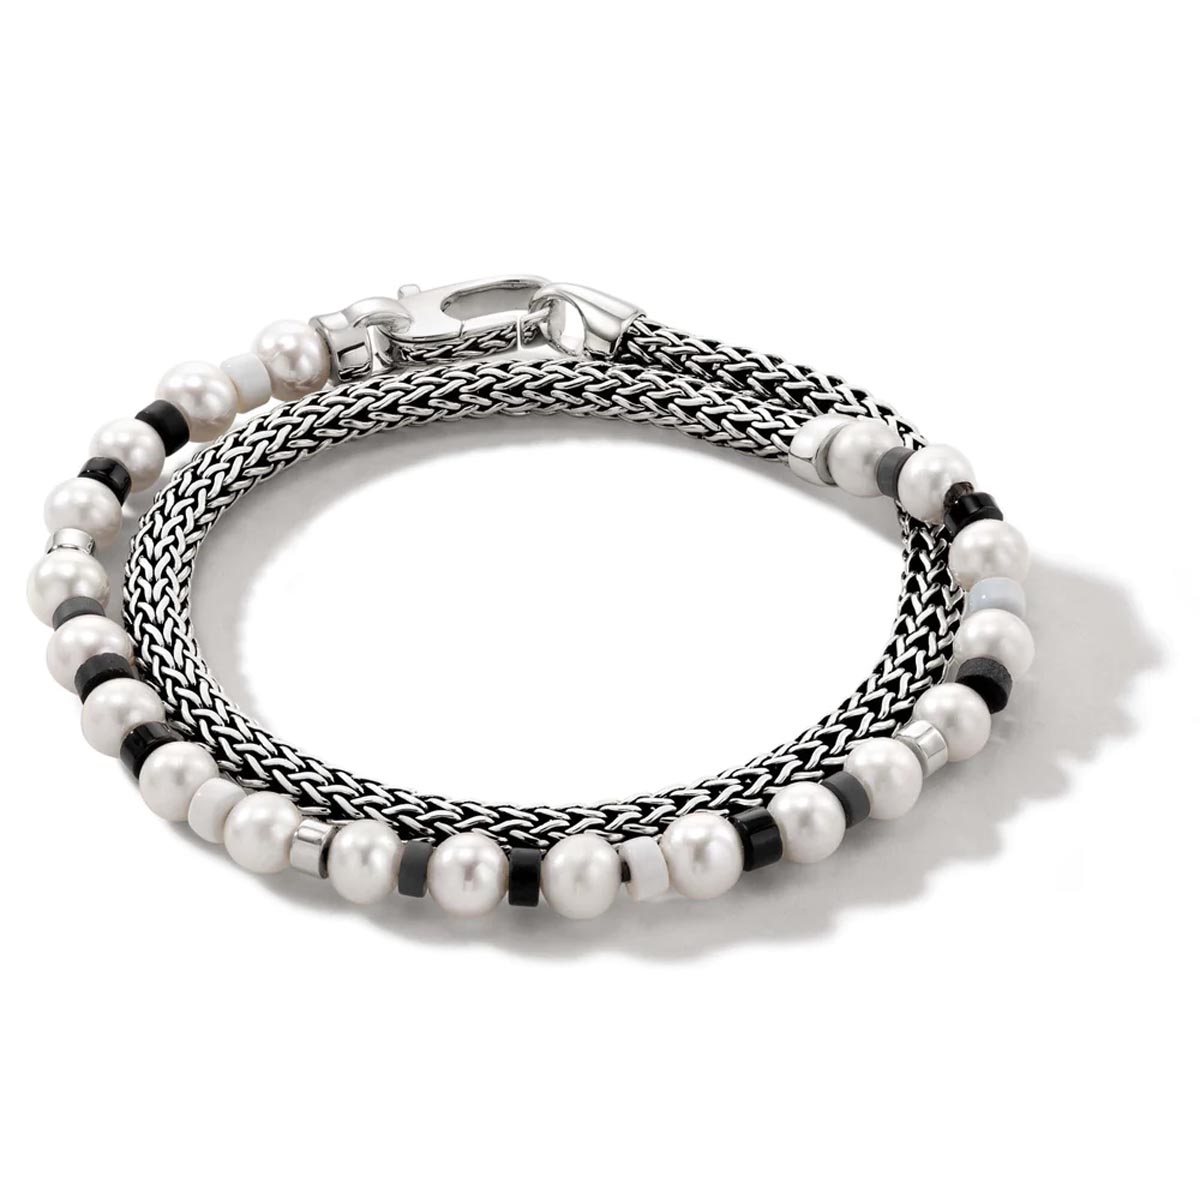 John Hardy Colorblock Collection Cultured Freshwater Pearl Black Onyx and Hematite Bead Bracelet in Sterling Silver with White Enamel (5.5-6mm pearls)